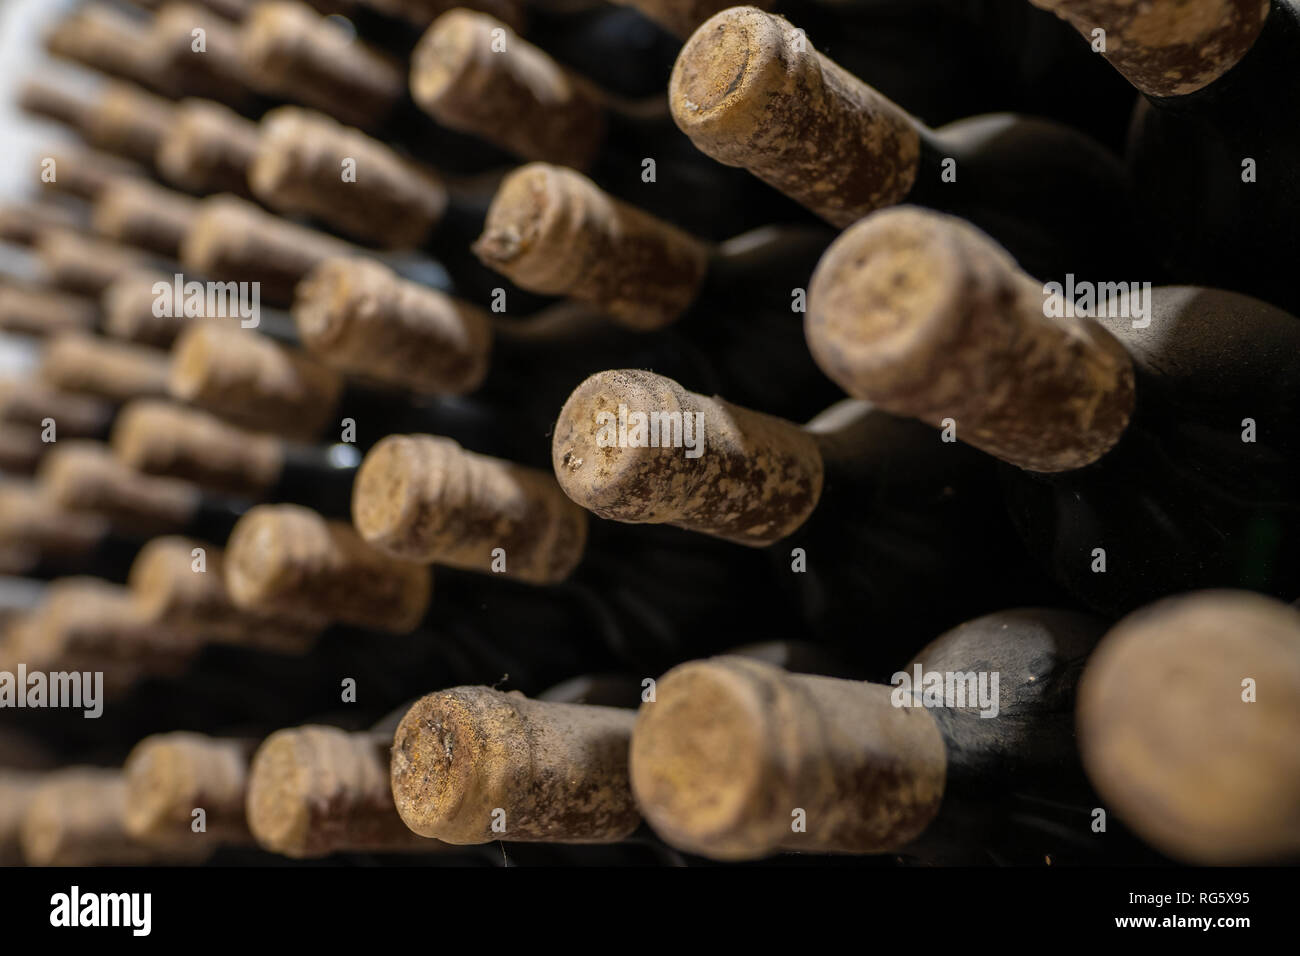 Wine bottles covered in dust and mold in a traditional winery Stock Photo